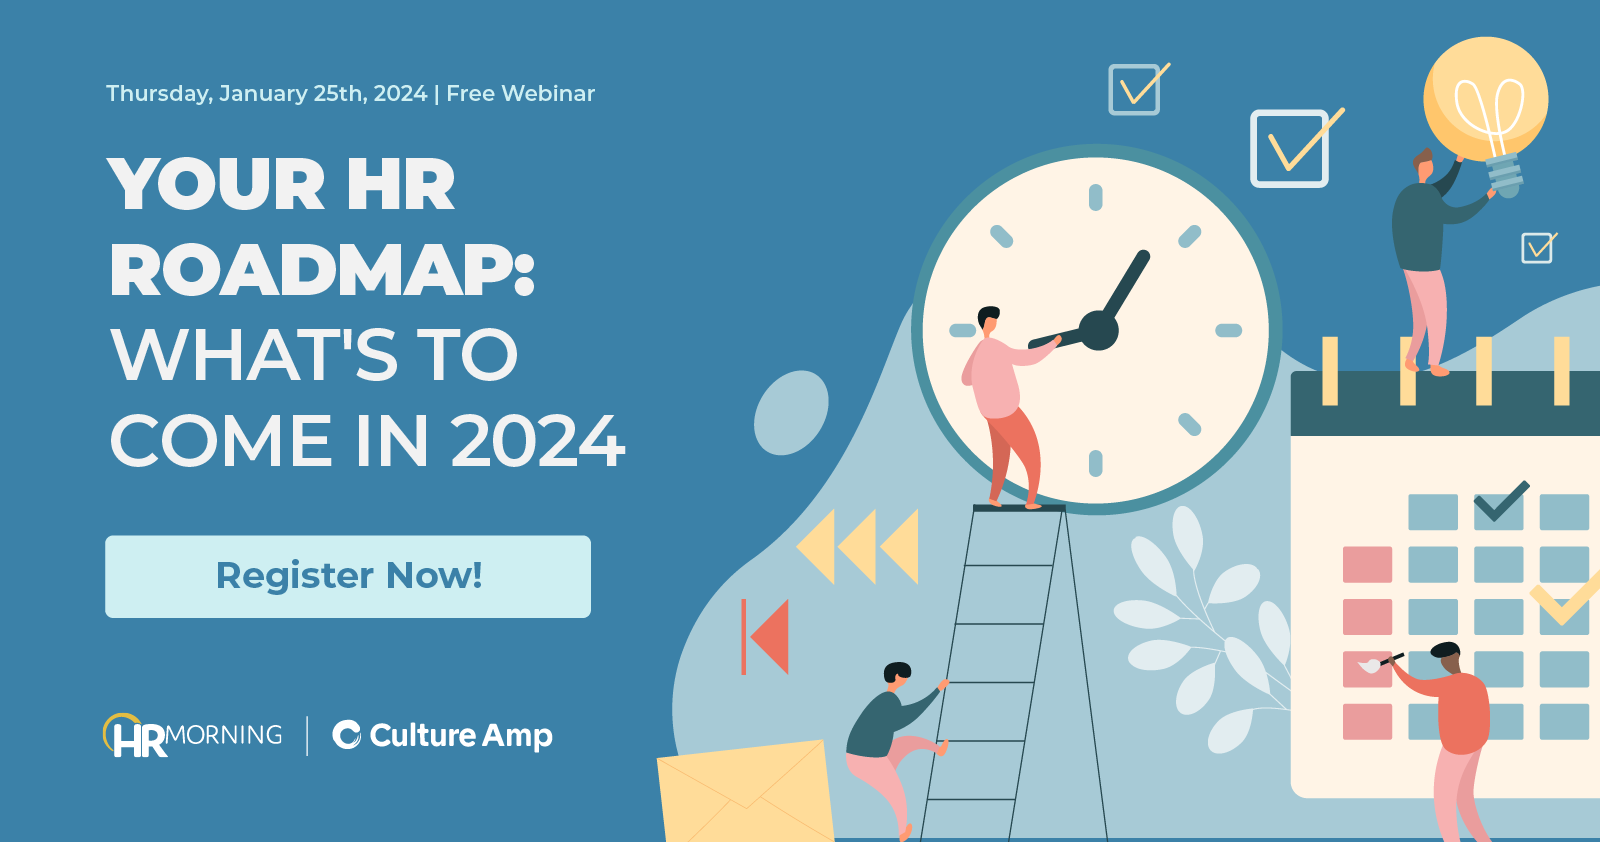 Your HR Roadmap: What's to come in 2024